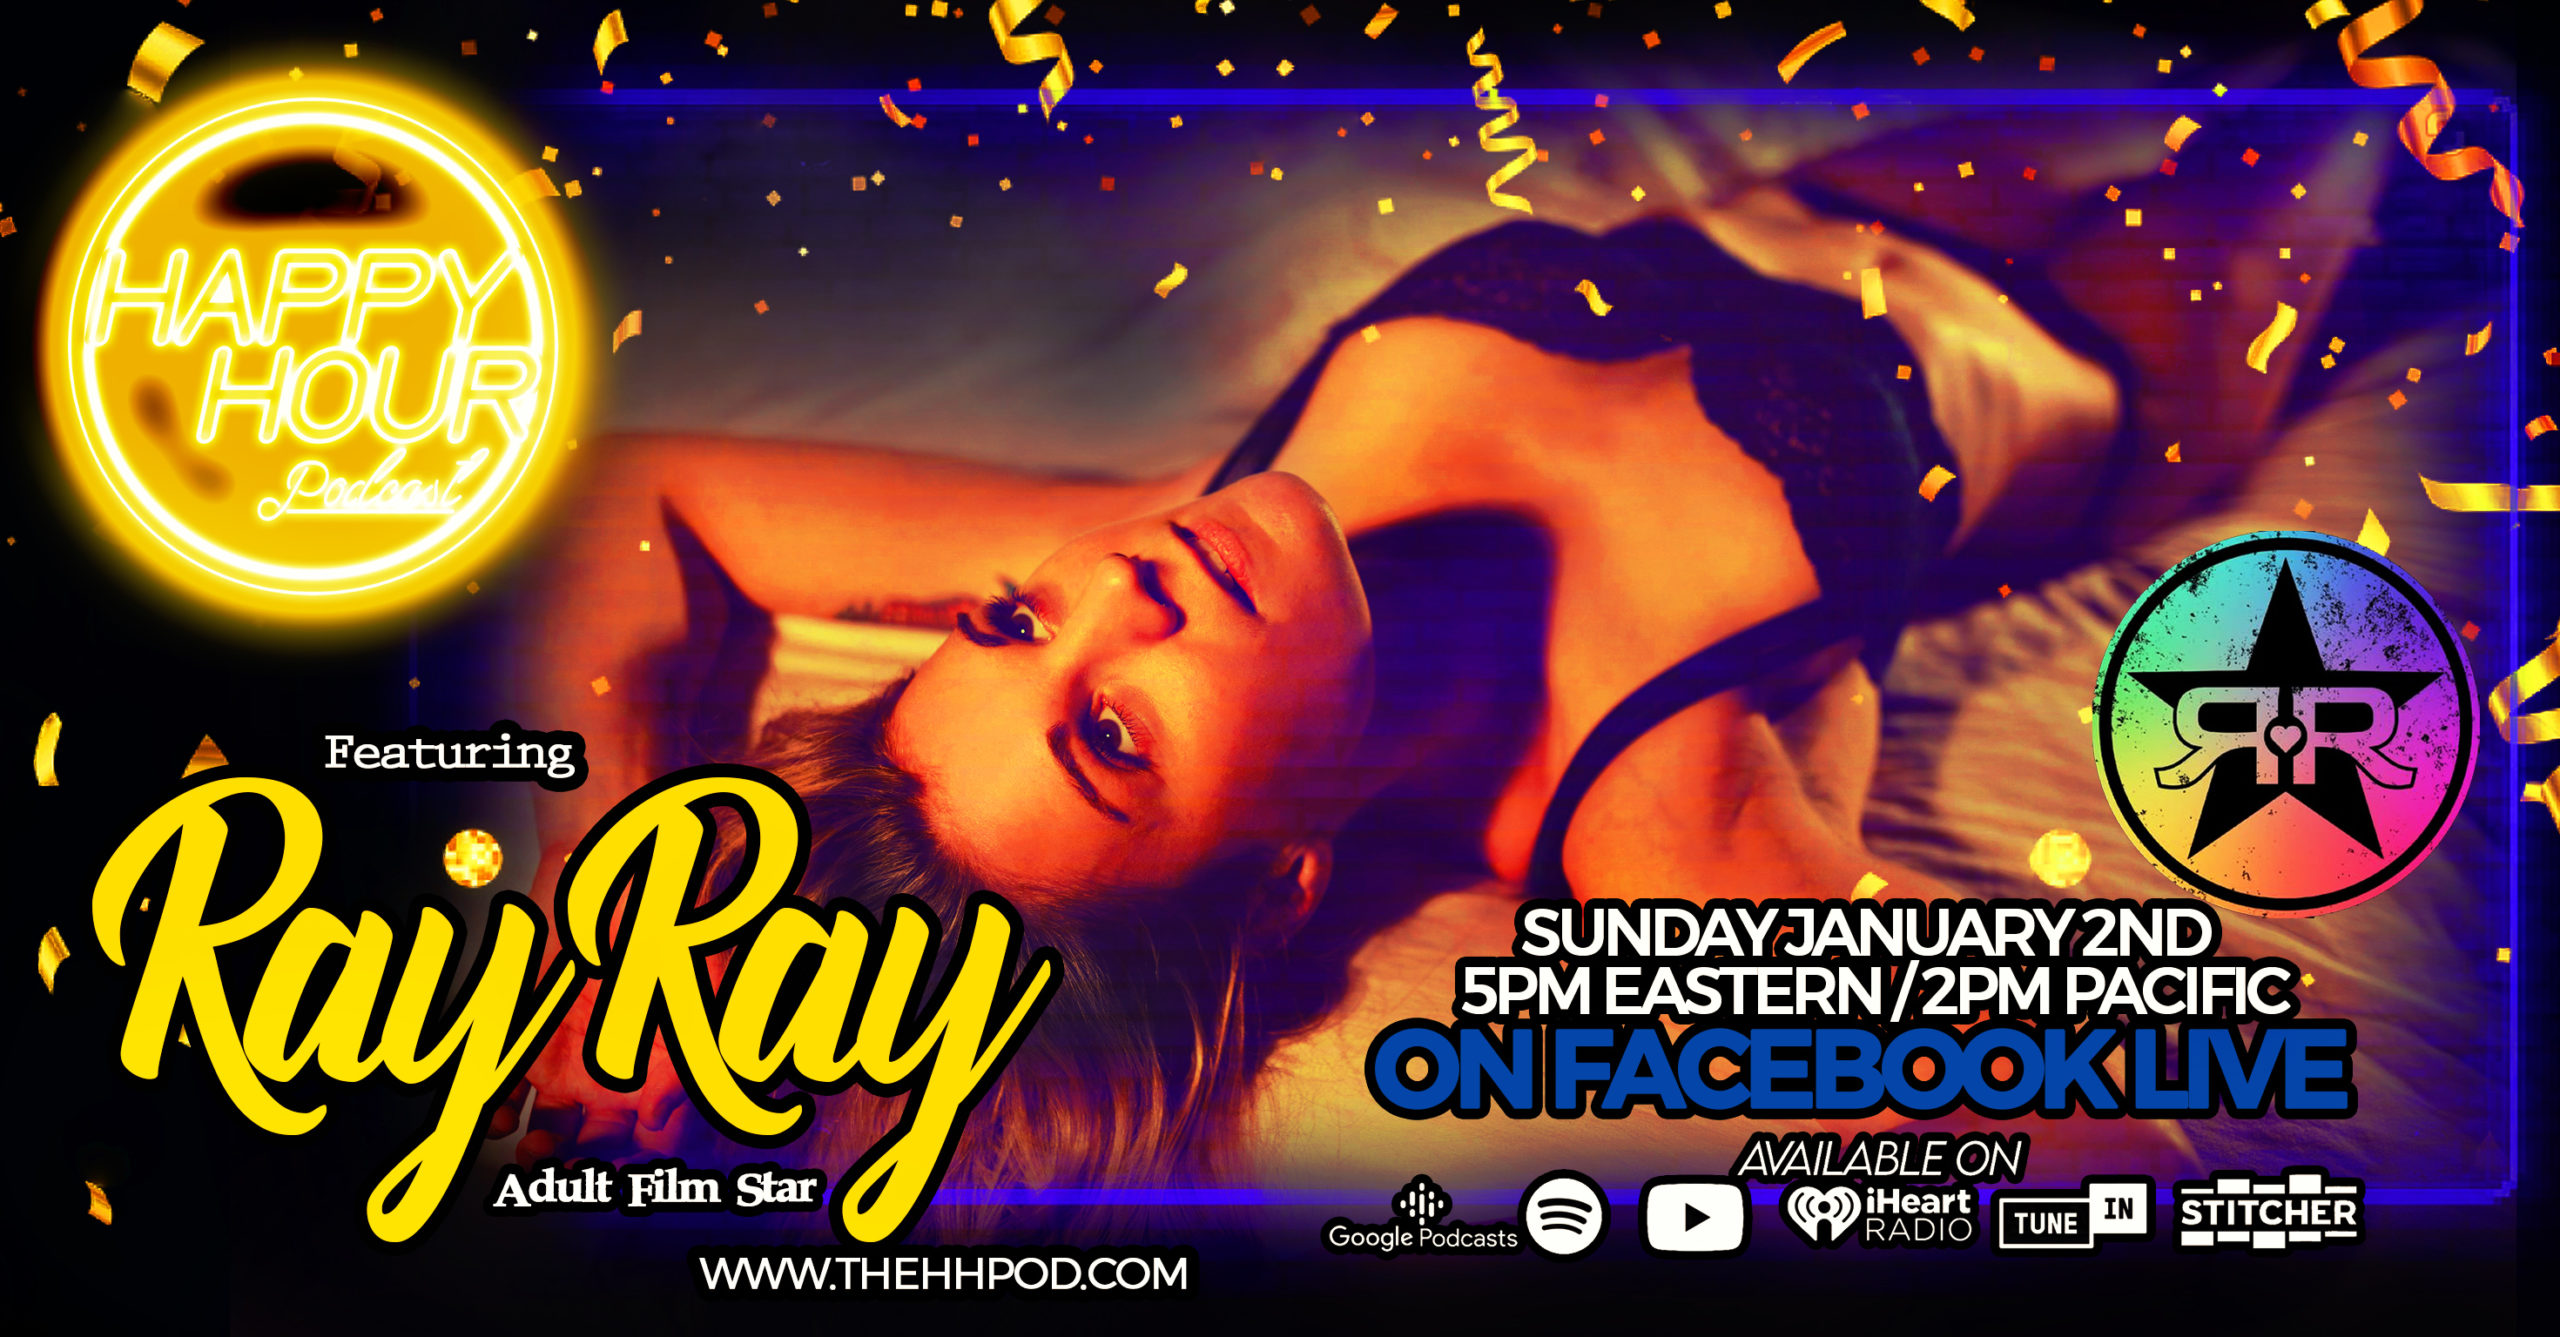 Featuring Ray Ray 
Extended Video Version on Youtube